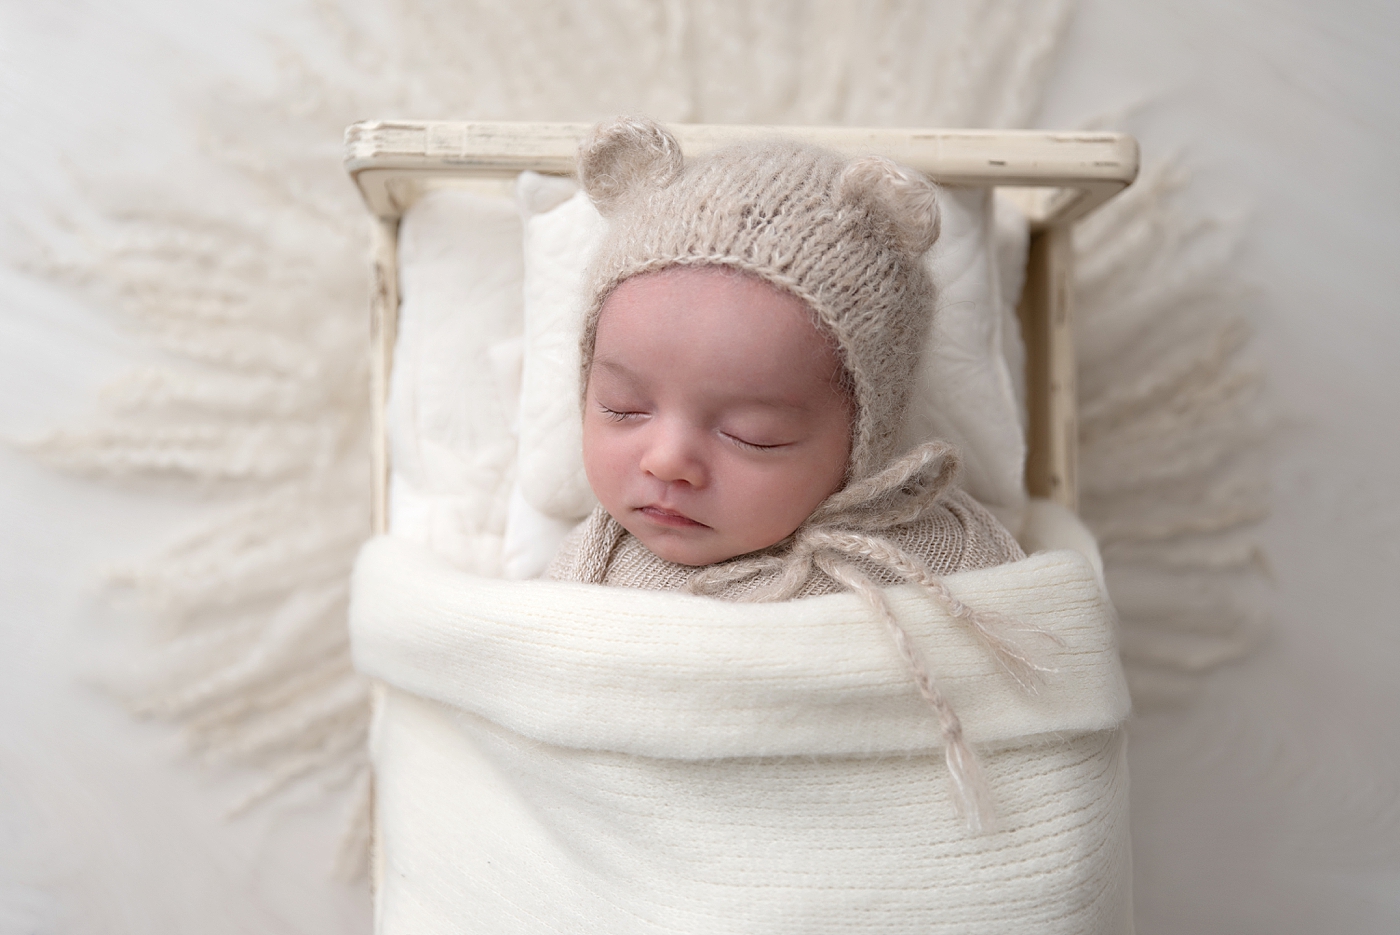 Newborn sleeping on small baby bed for newborn photos. Photo by Rachel Brookes Photography.